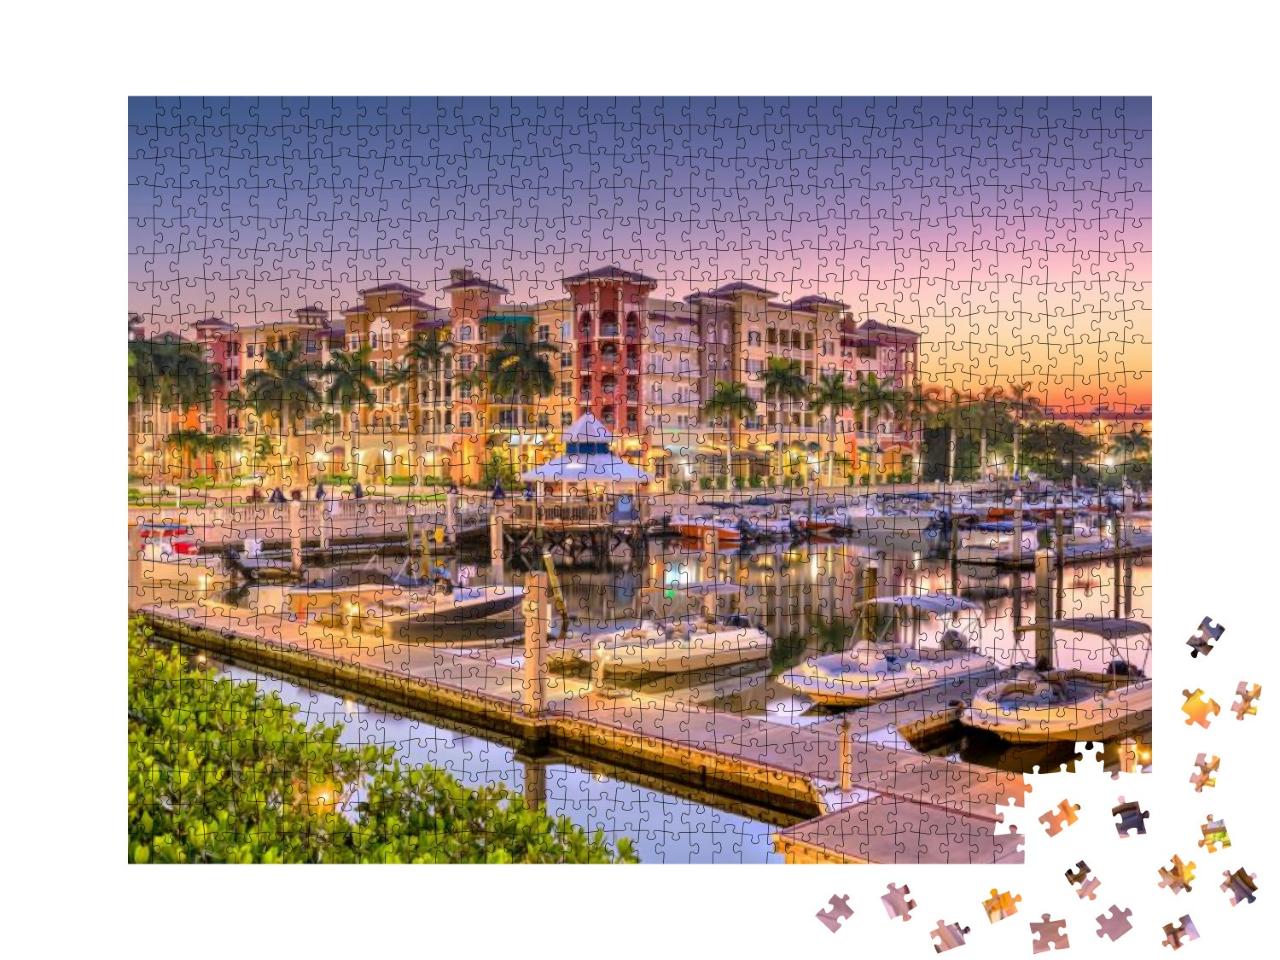 Naples, Florida, USA Town Skyline on the Water At Dawn... Jigsaw Puzzle with 1000 pieces